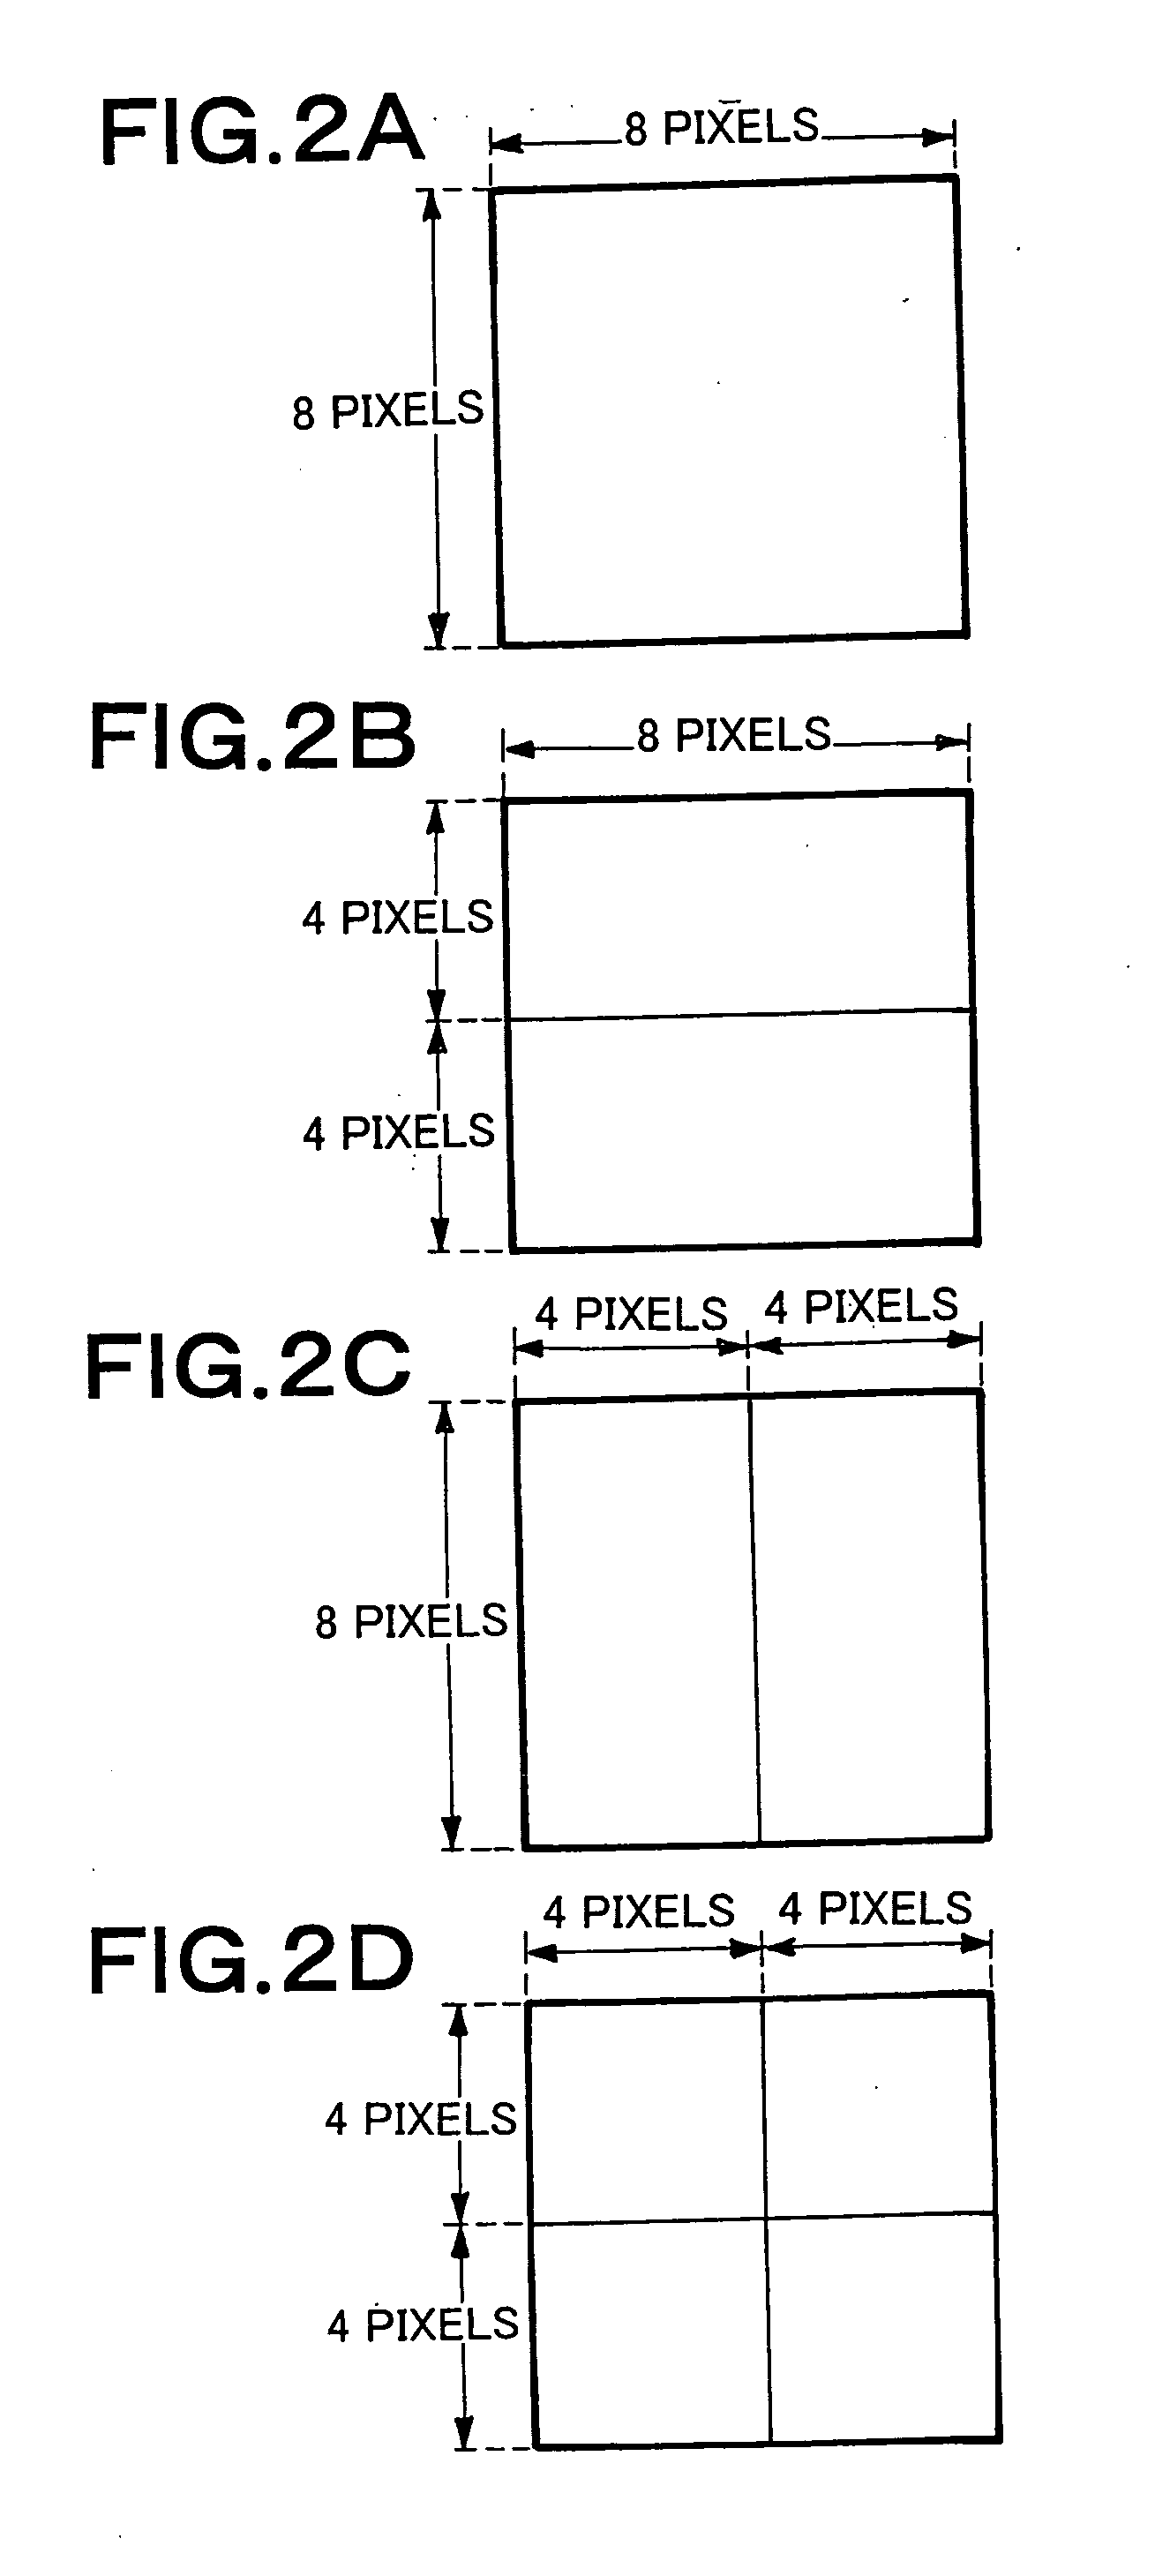 Selection of encoded data, setting of encoded data, creation of recoded data, and recoding method and device